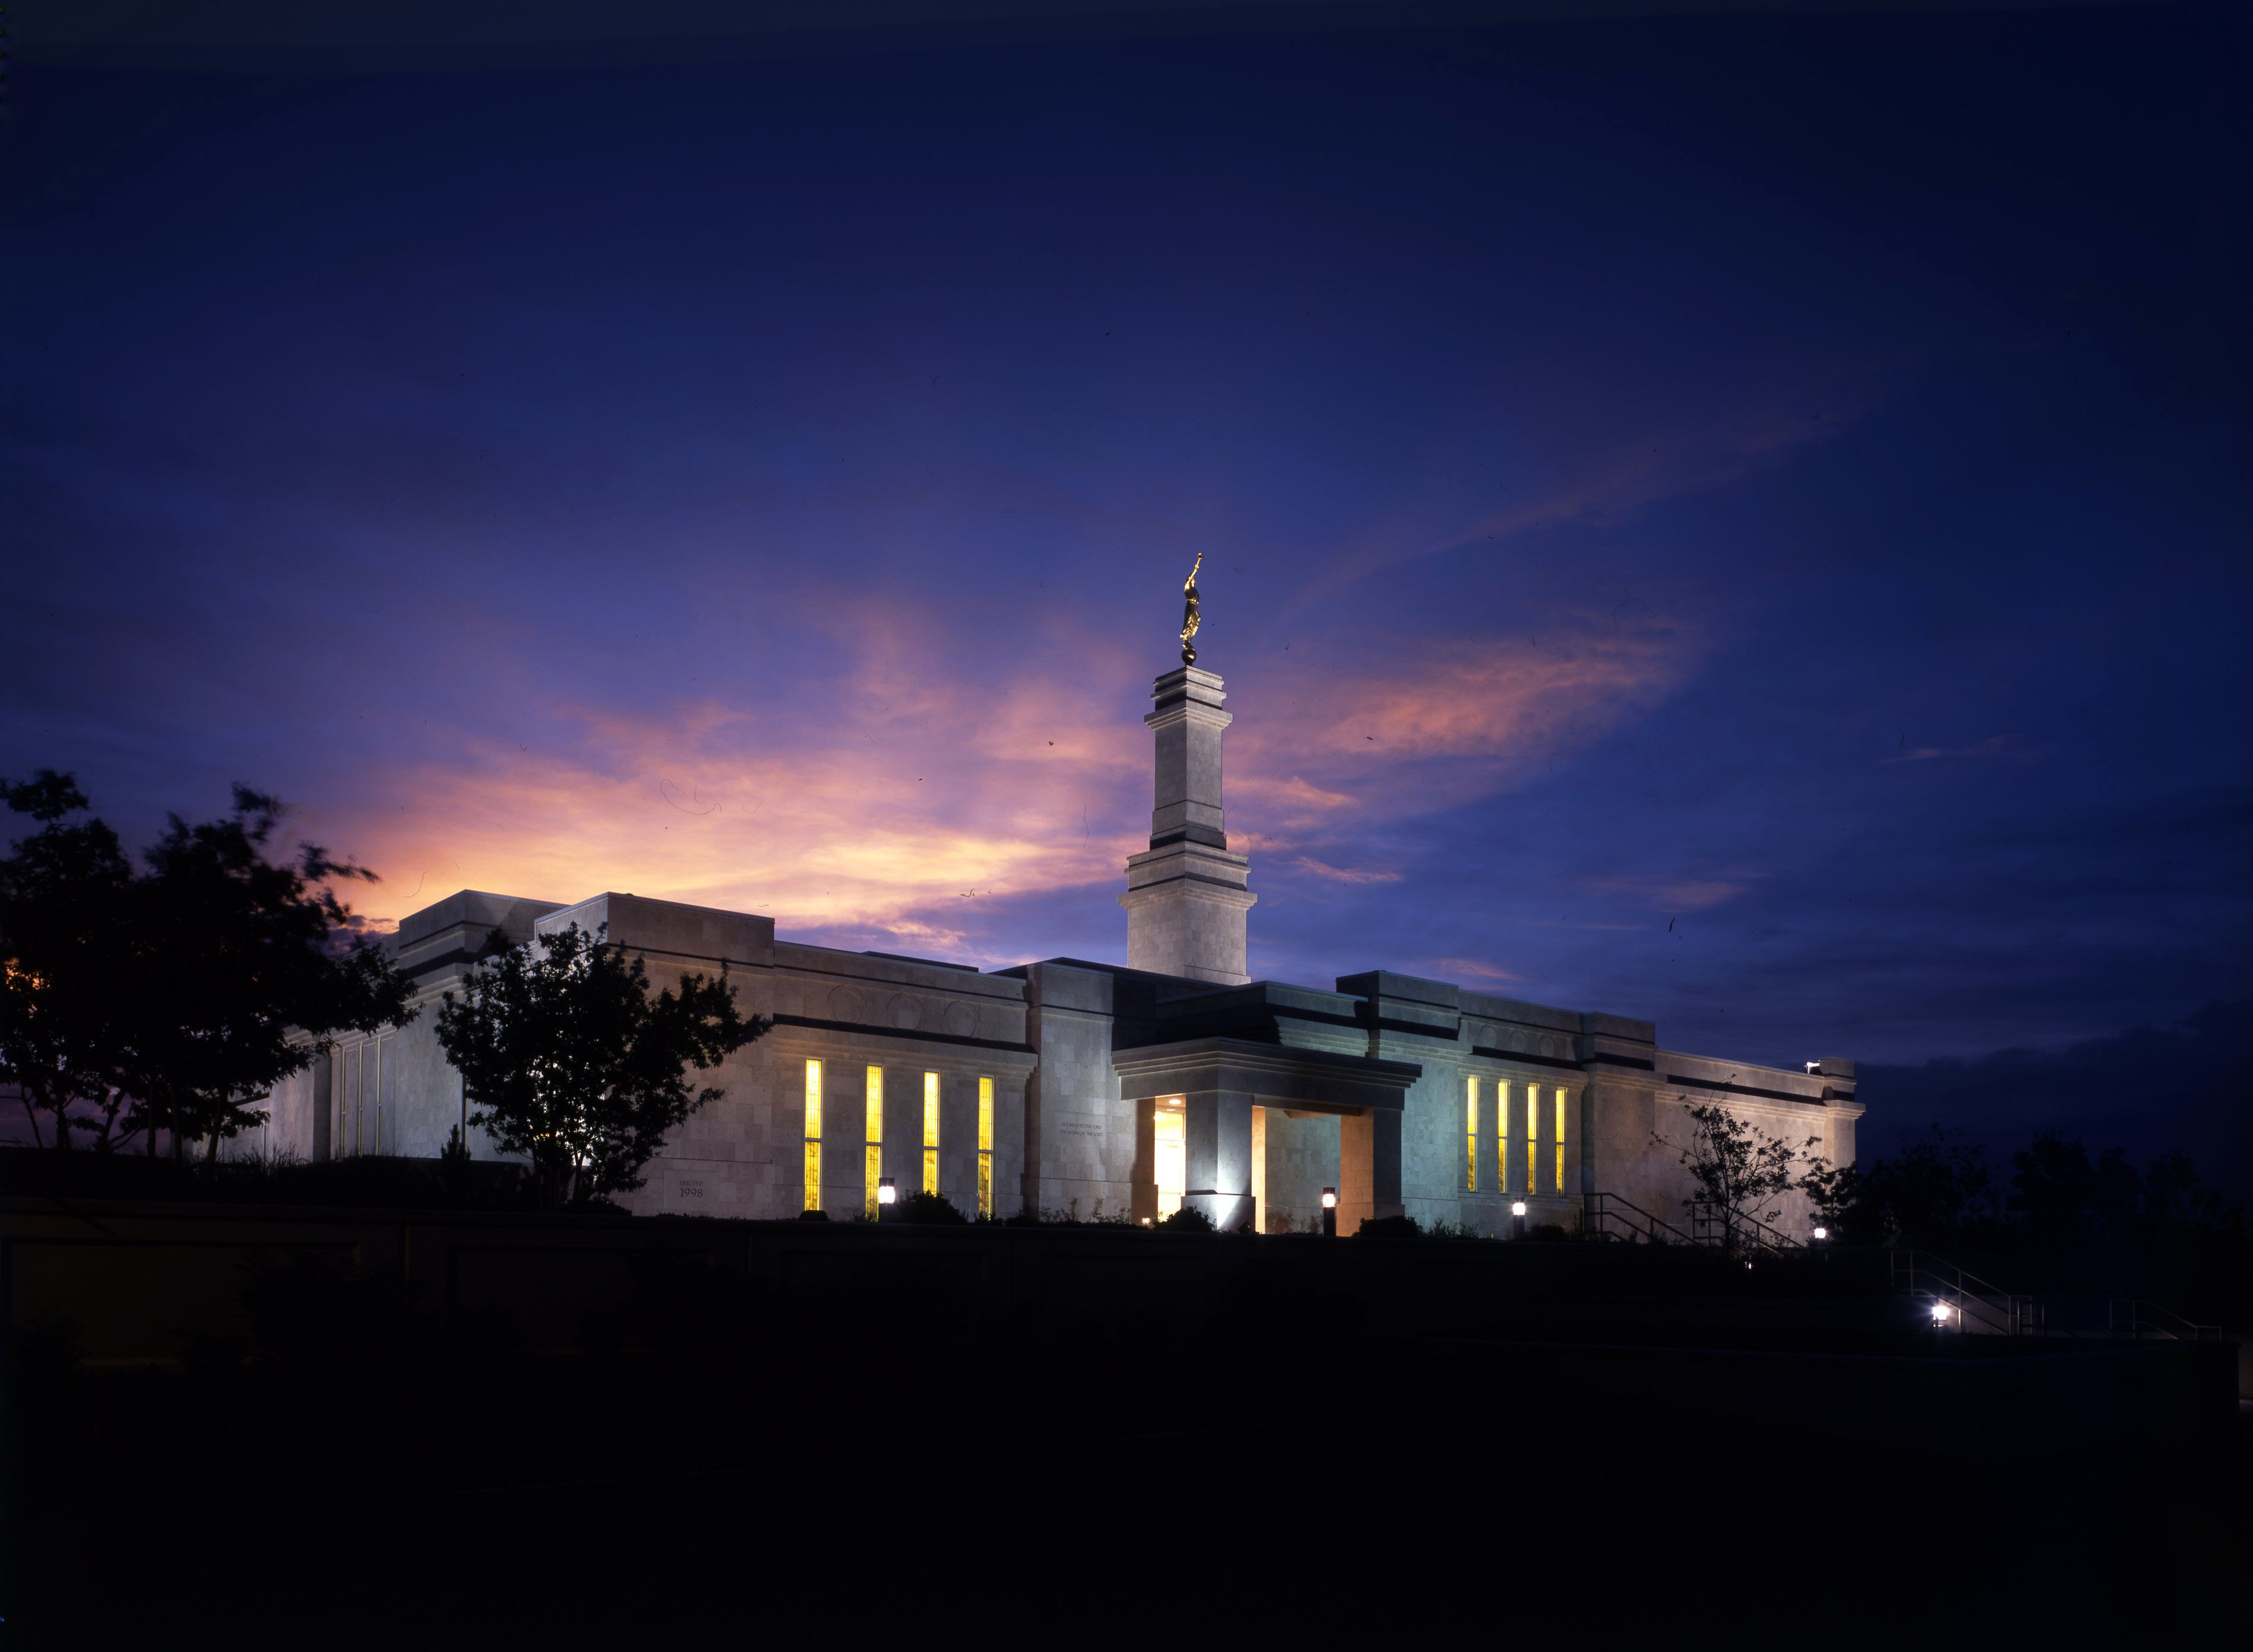 The Monticello Utah Temple is lit up with exterior lights in the evening, with scenery of silhouetted trees against a sunset sky.